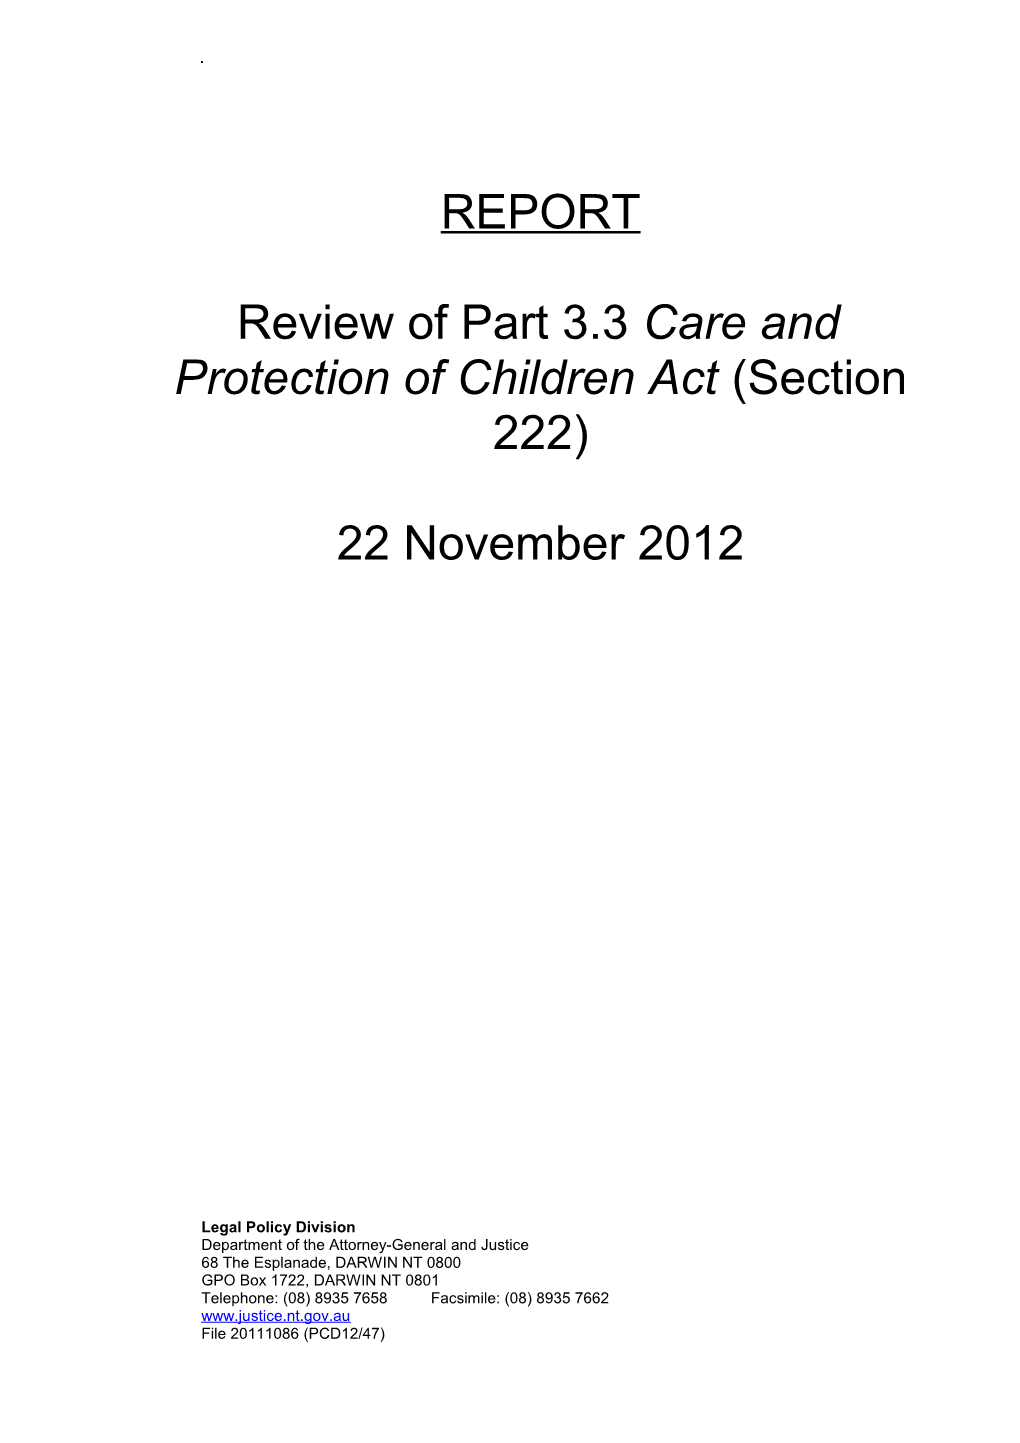 Review of Part 3.3 Care and Protection of Children Act